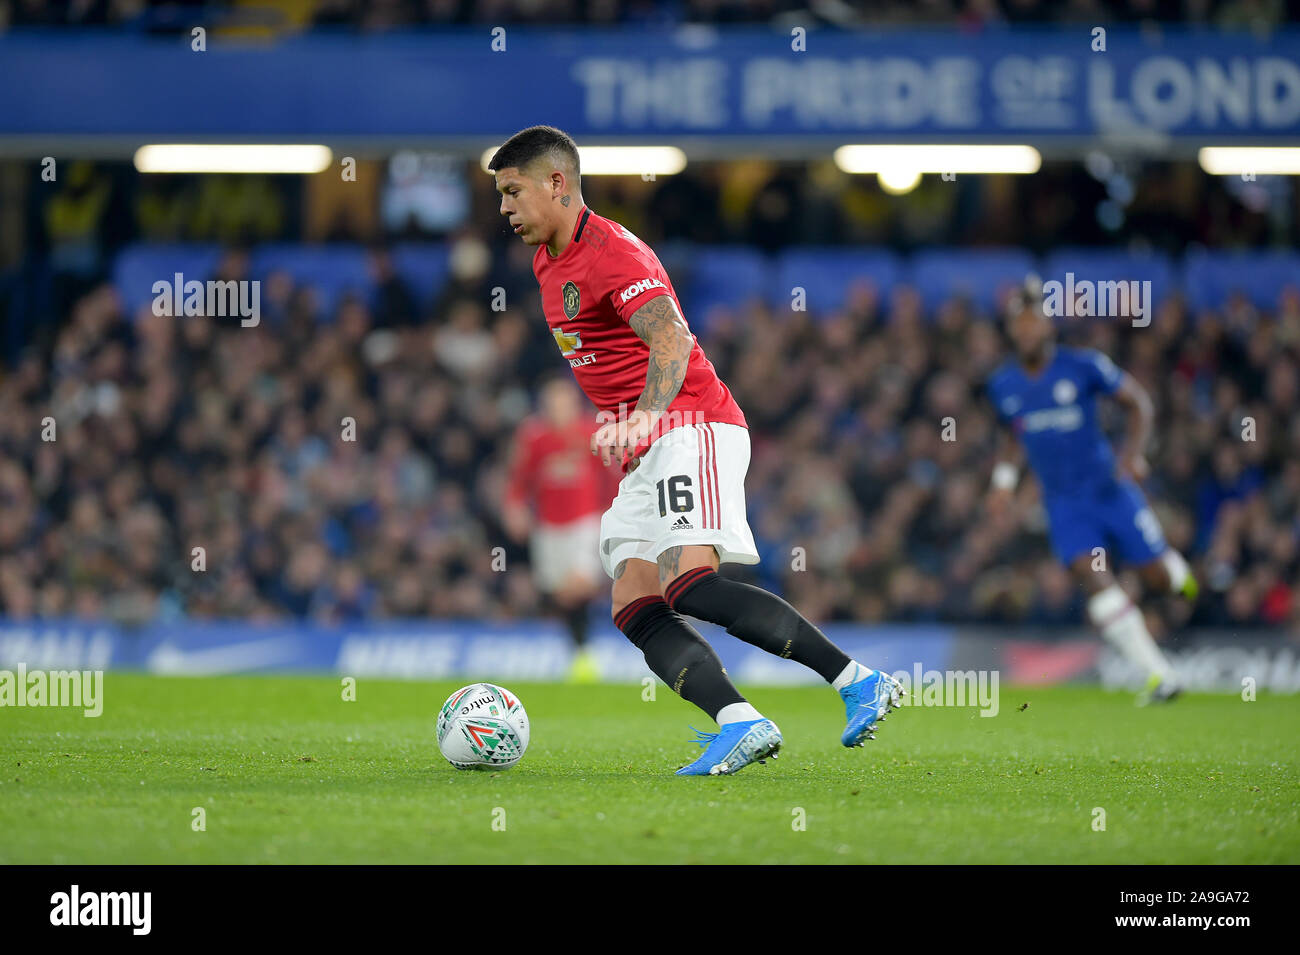 Marcos Rojo of Manchester Utd during the Chelsea vs Manchester United EFL Carabao Cup Round of 16 tie at Stamford Bridge -Editorial use only, license Stock Photo